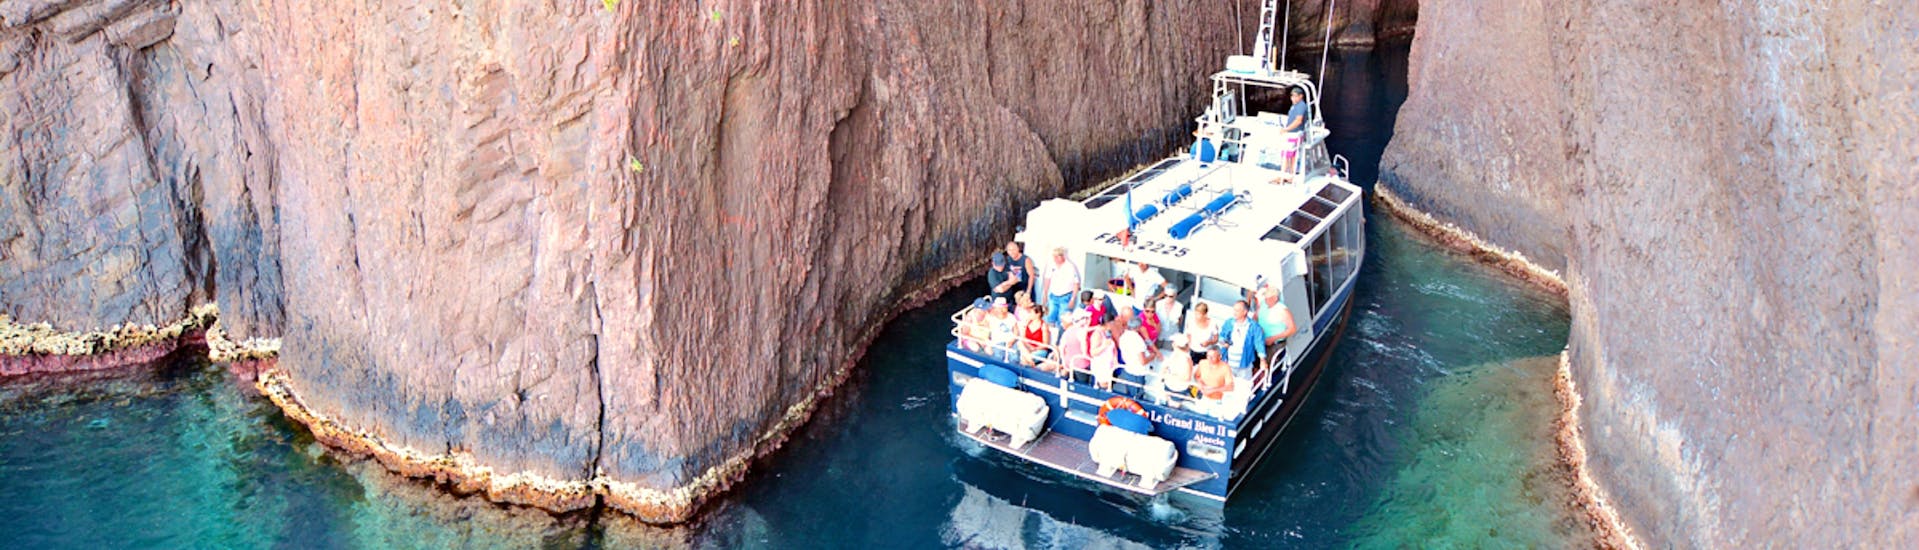 People are doing a Boat Trip to the Calanques de Piana from Cargèse with Croisière Grand Bleu Cargèse.